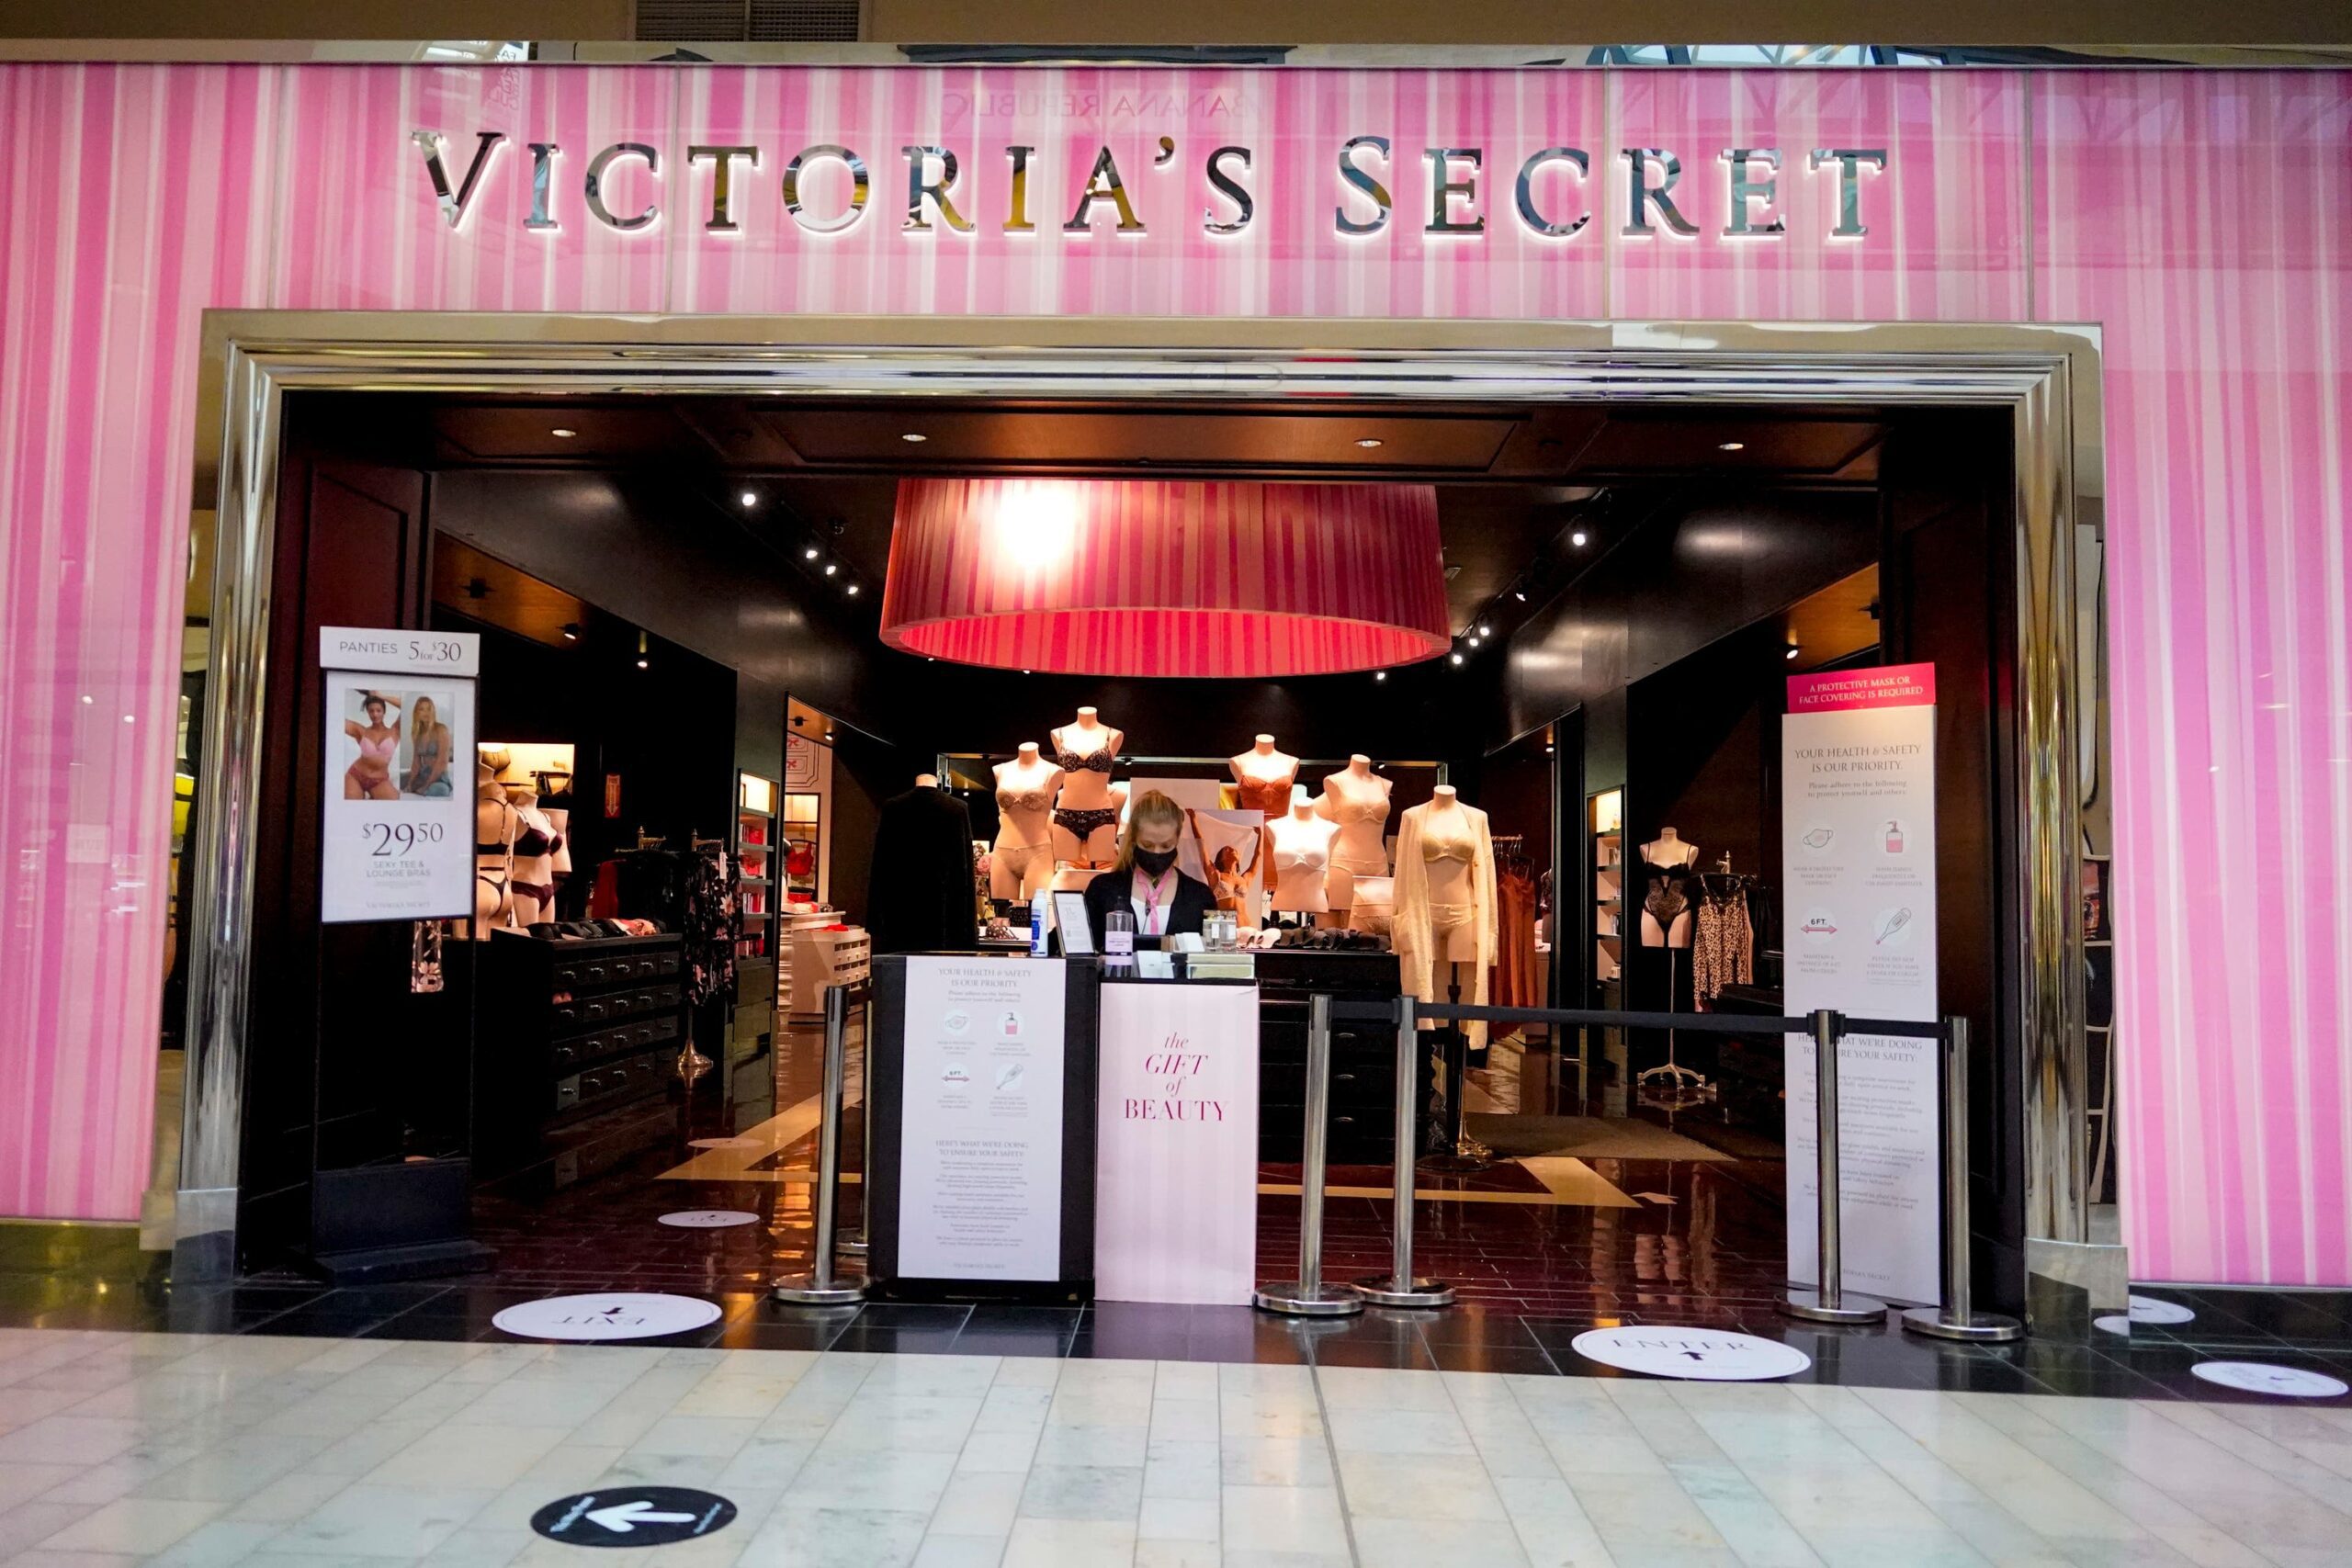 The entrance to a Victoria’s Secret store in Pittsburgh